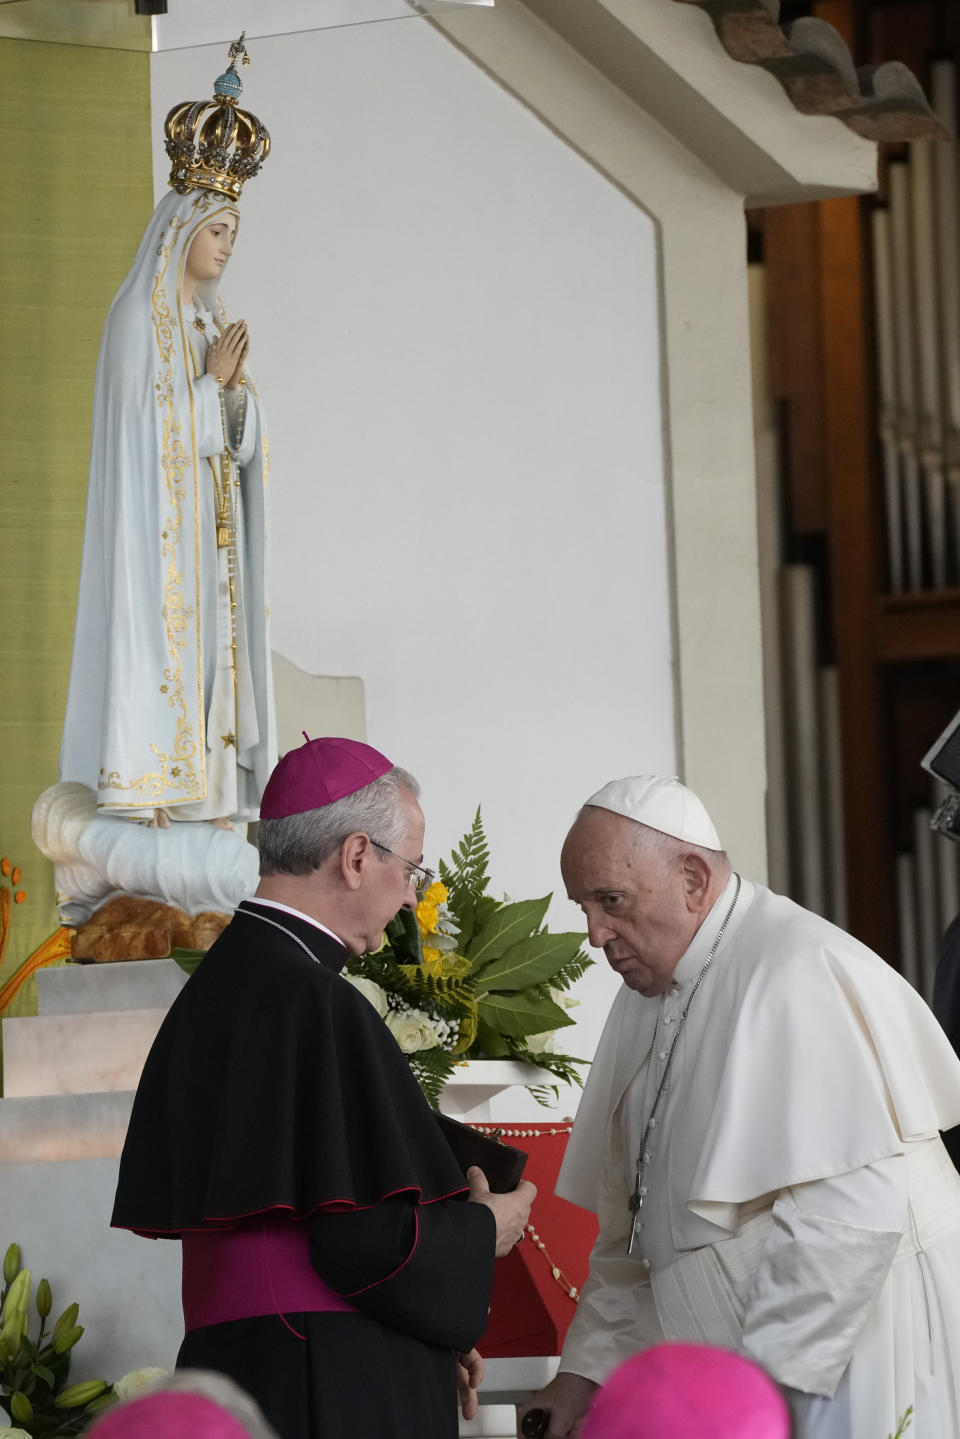 Pope Francis, right, arrives at the Catholic holy shrine of Fatima, in central Portugal, to pray the rosary with sick young people, Saturday, Aug. 5, 2023. Francis is in Portugal through the weekend to preside over the 37th World Youth Day, a jamboree that St. John Paul II launched in the 1980s to encourage young Catholics in their faith. (AP Photo/Gregorio Borgia)